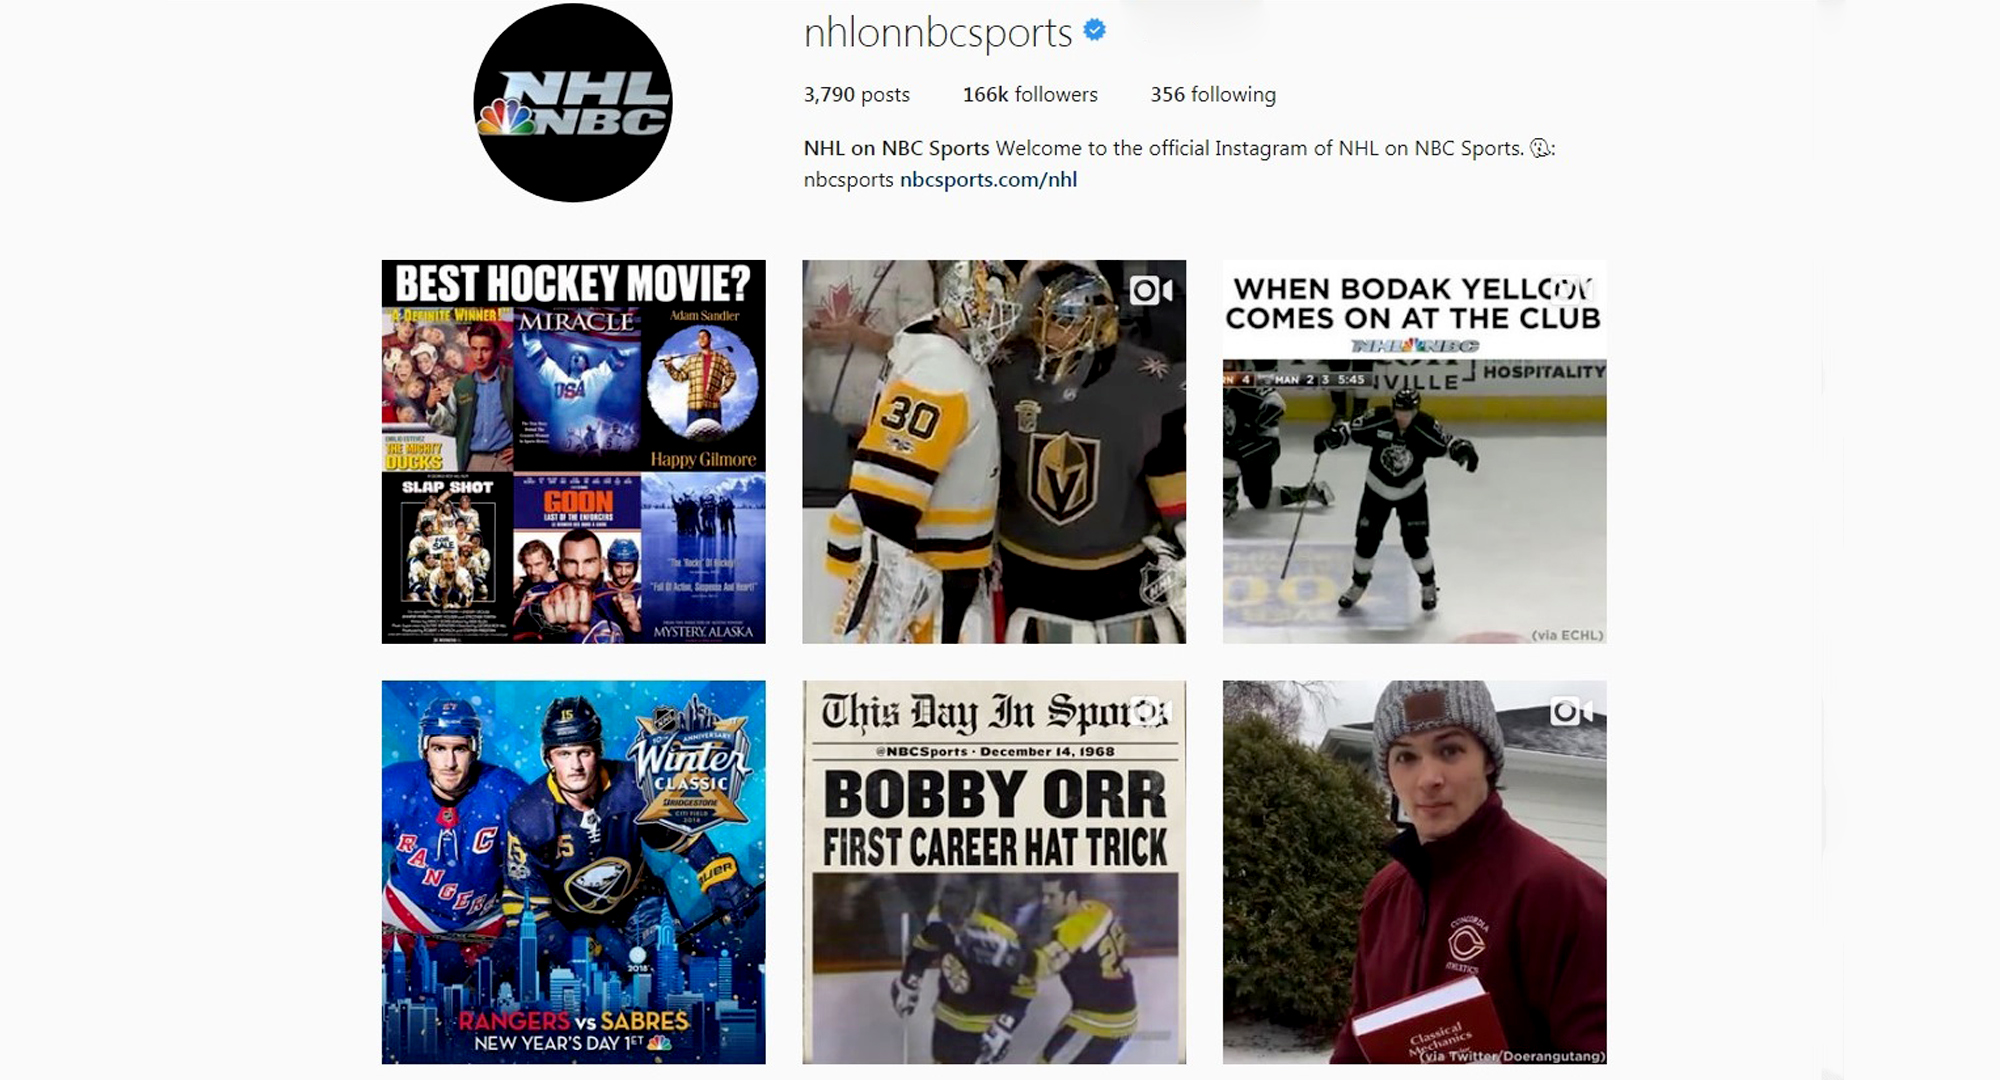 Zach Doerring's "skating to finals" video was picked up by several national media outlets including NHL on NBC.